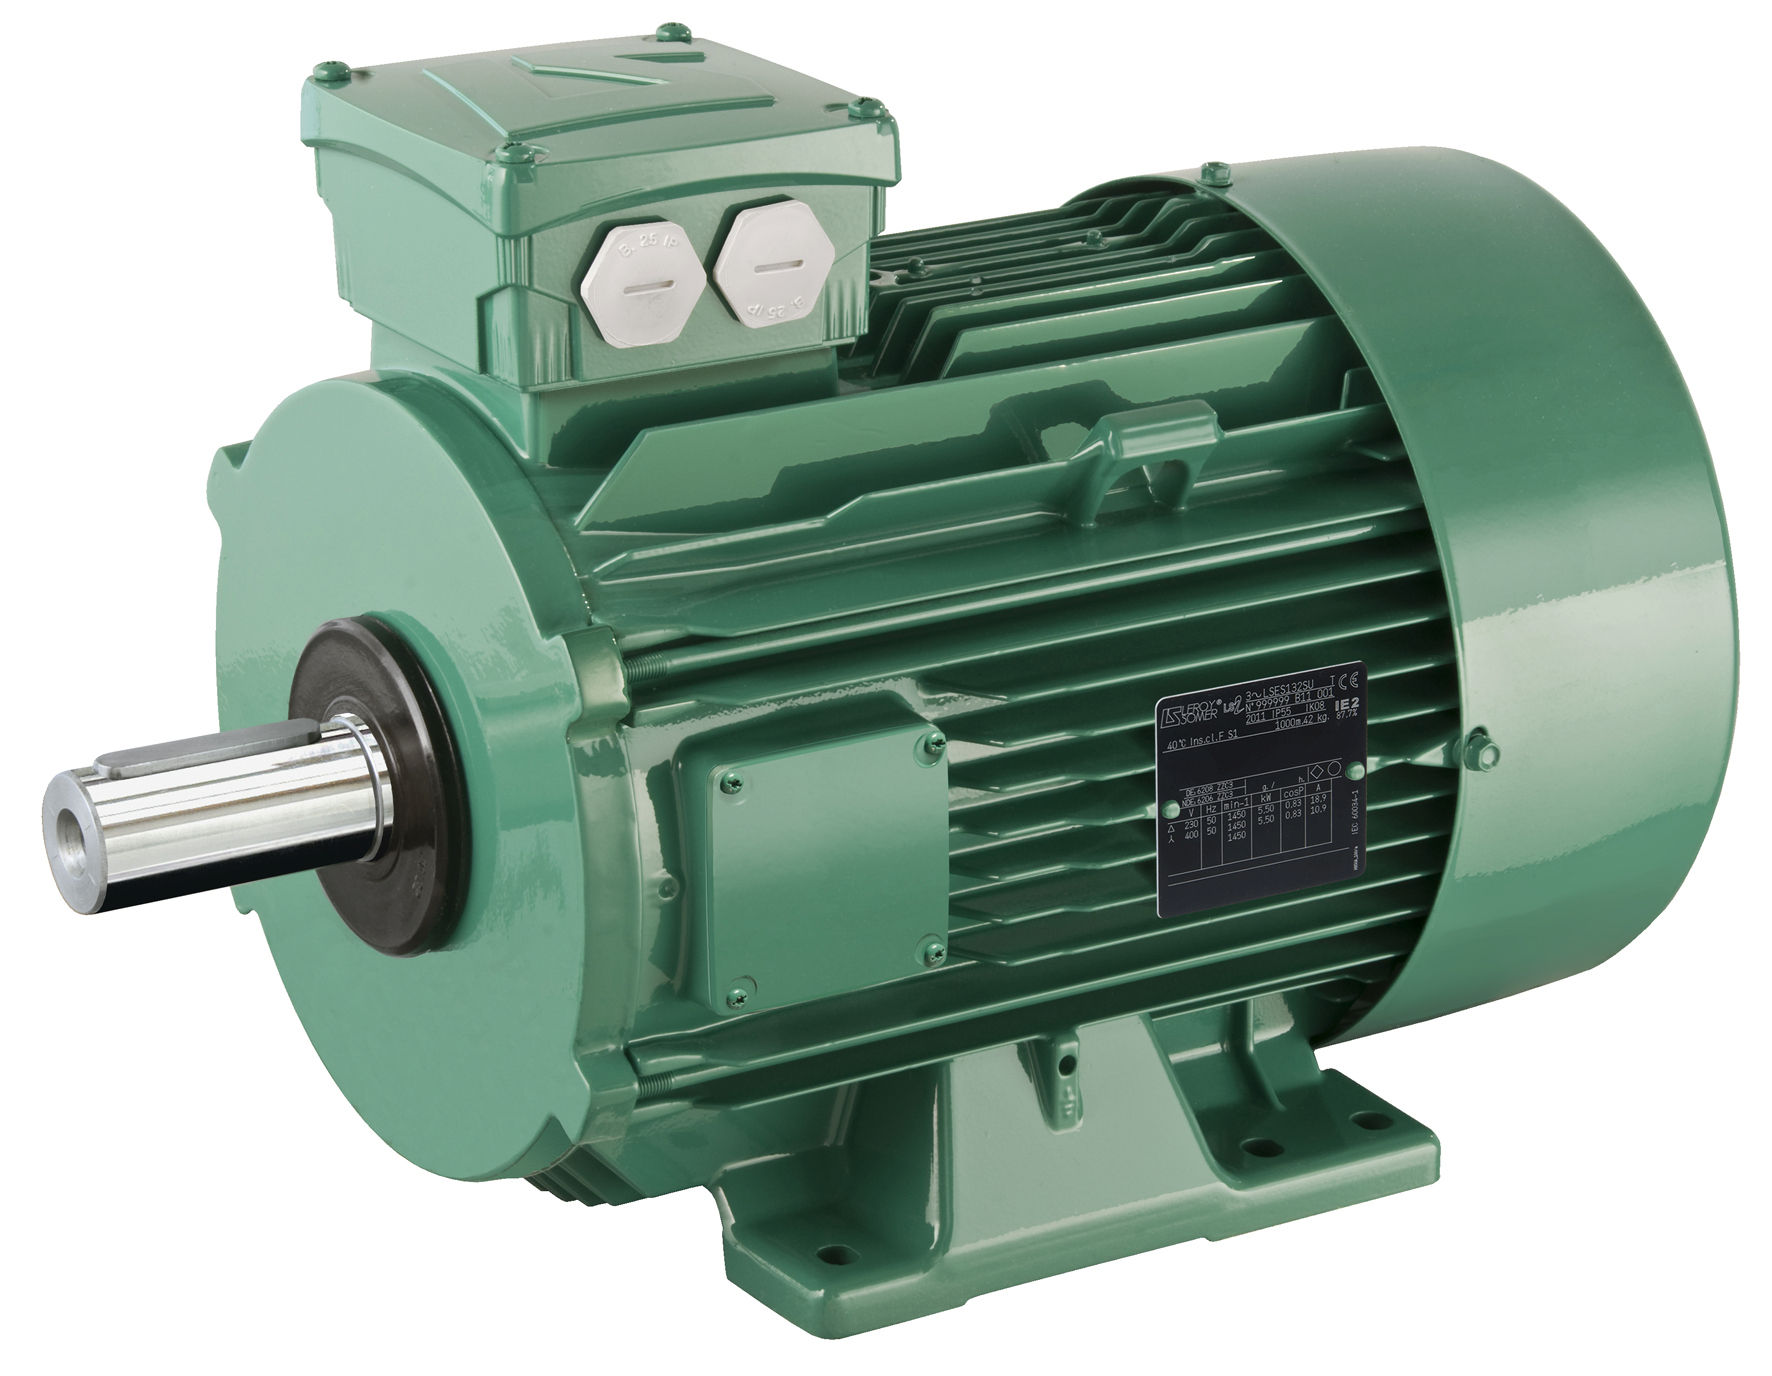 Products - Rome Electric Motor Works